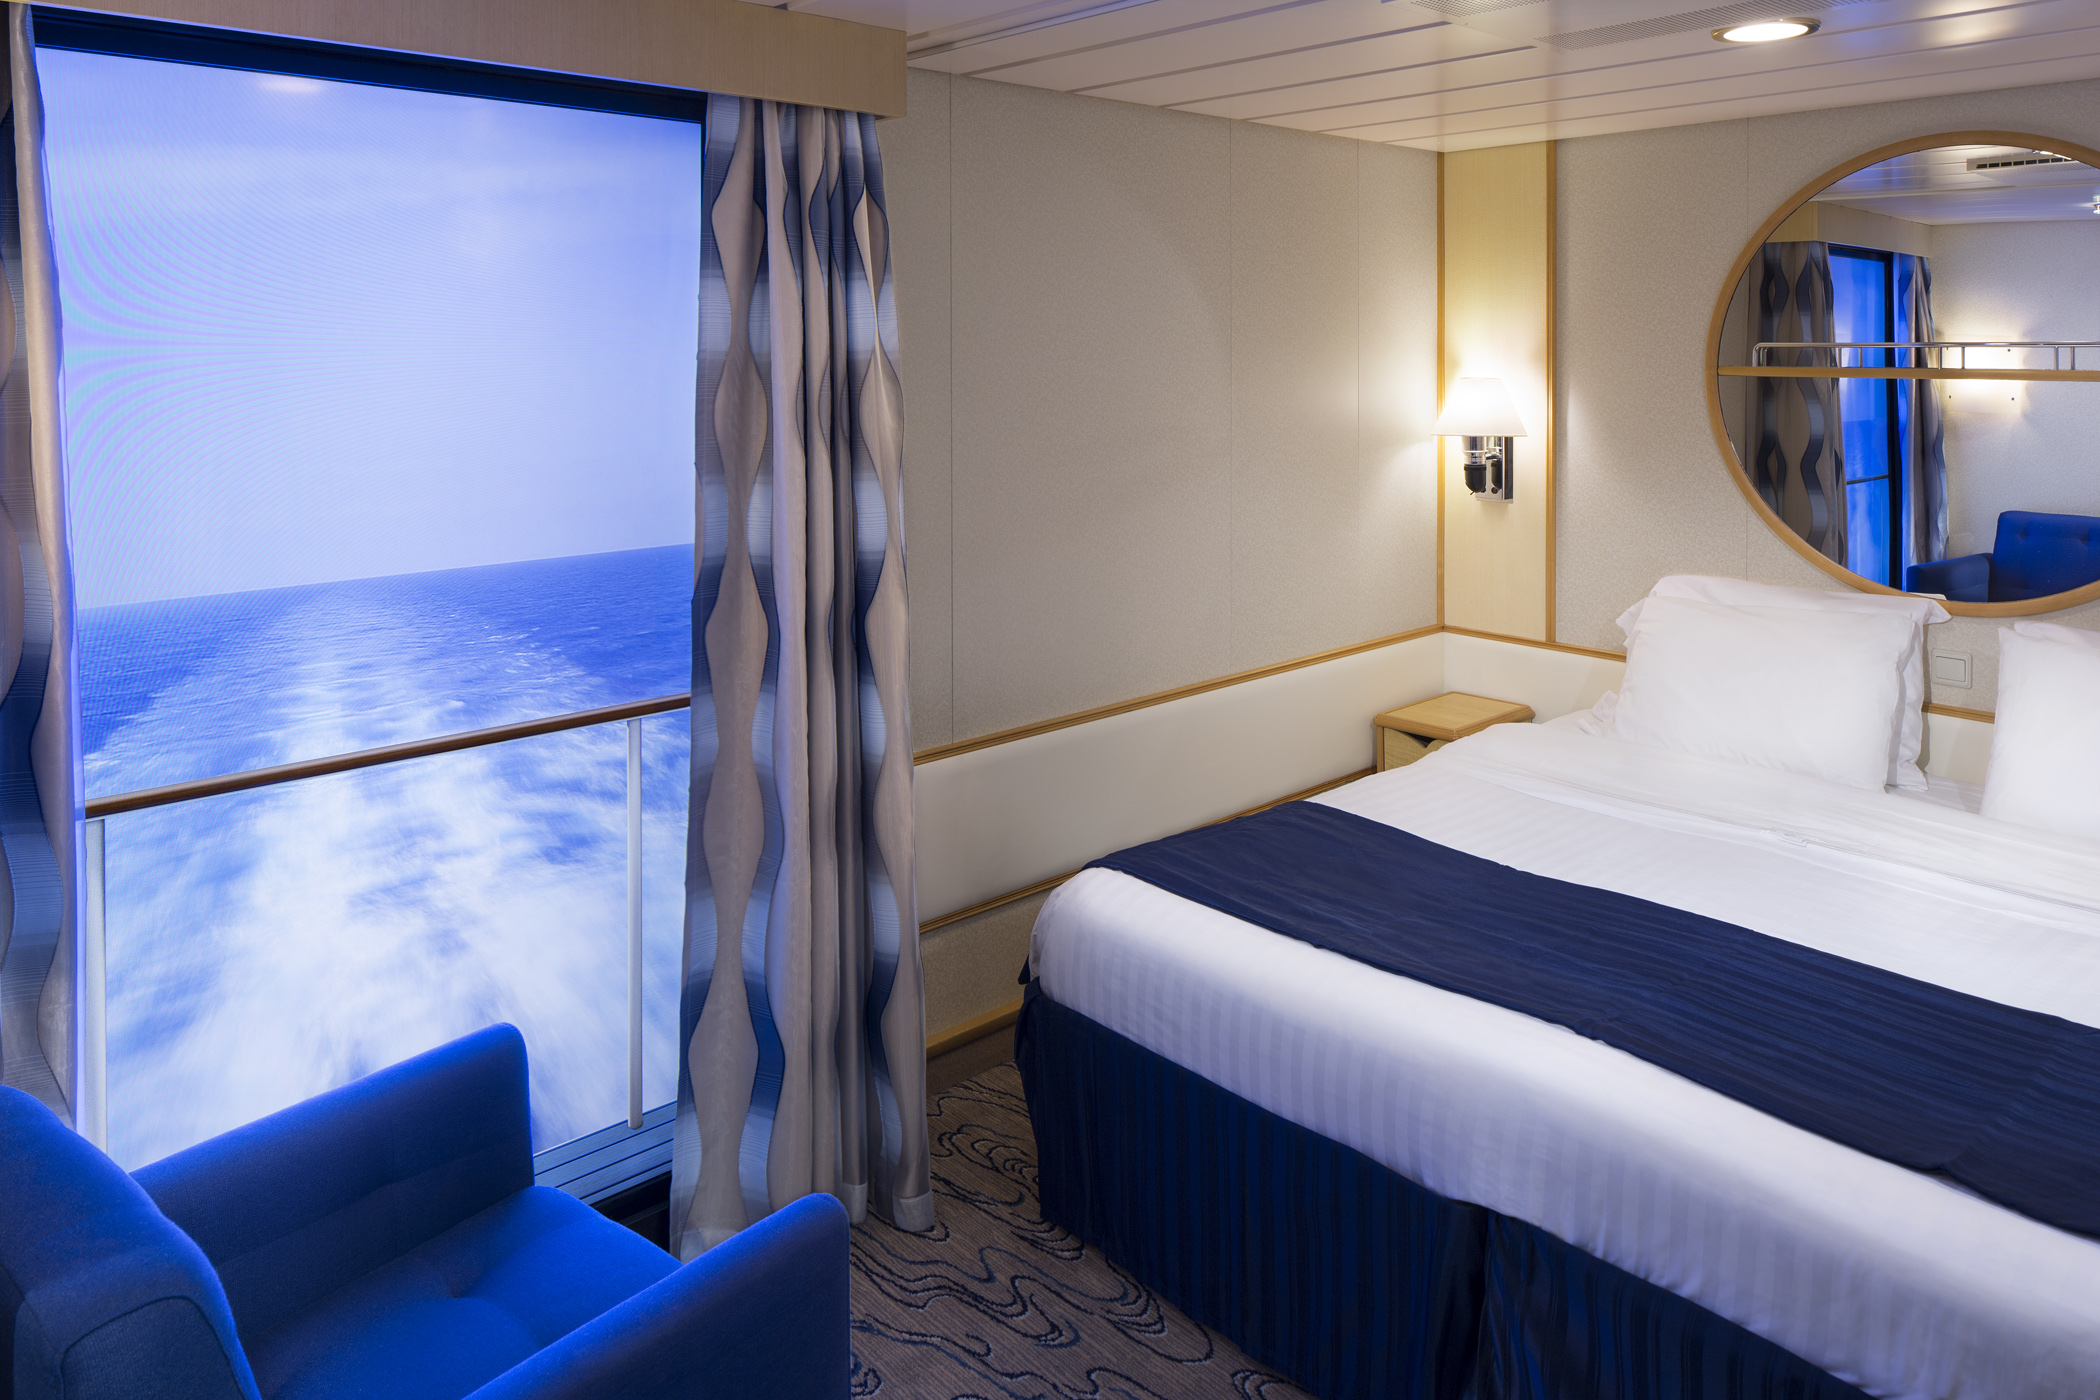 An Inside Room With A View Royal Caribbean Blog